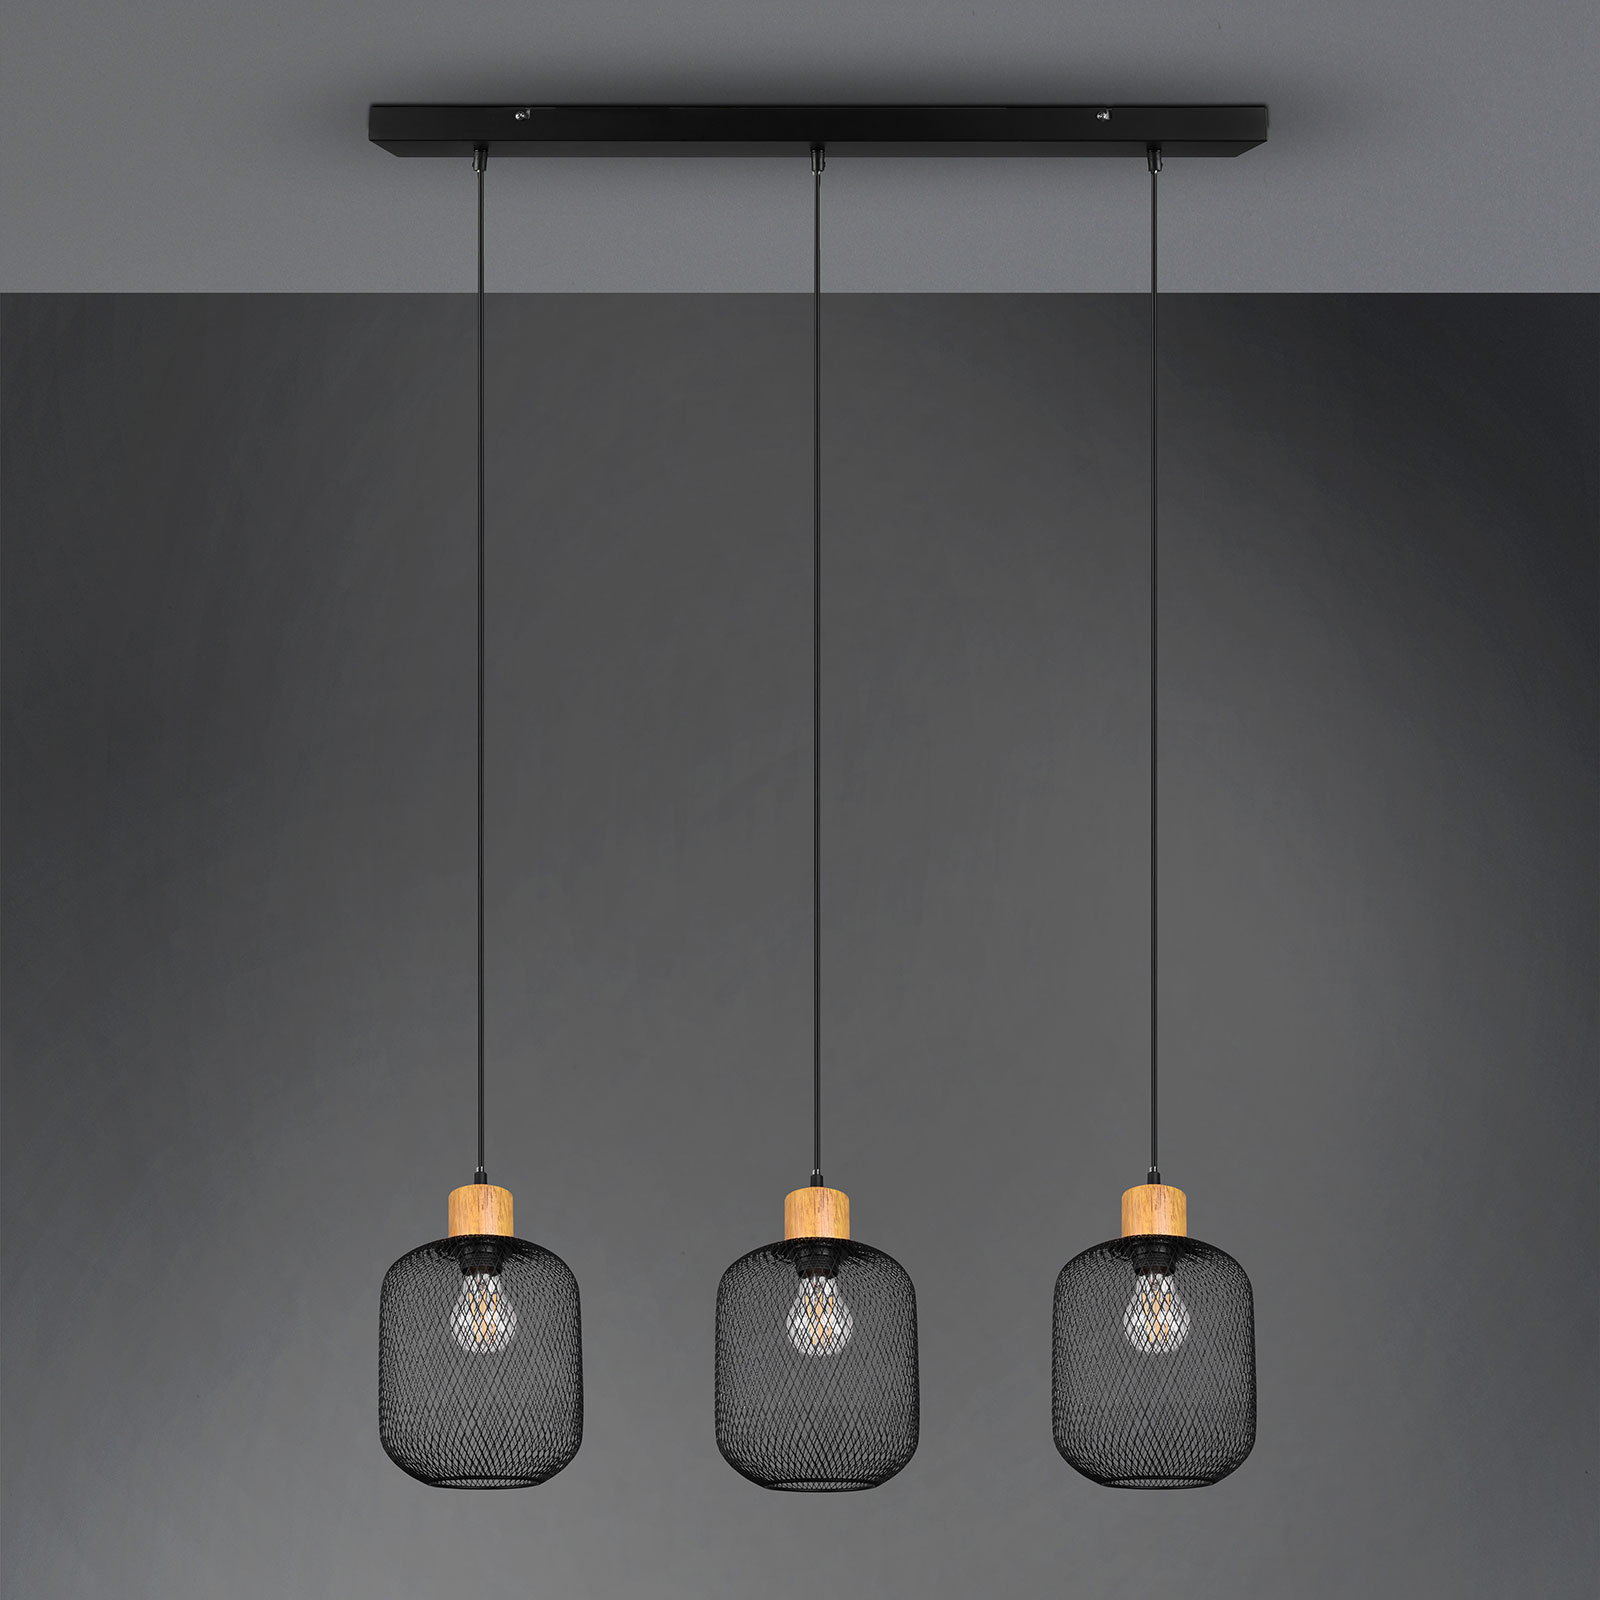 Calimero hanging light cage look 3-bulb